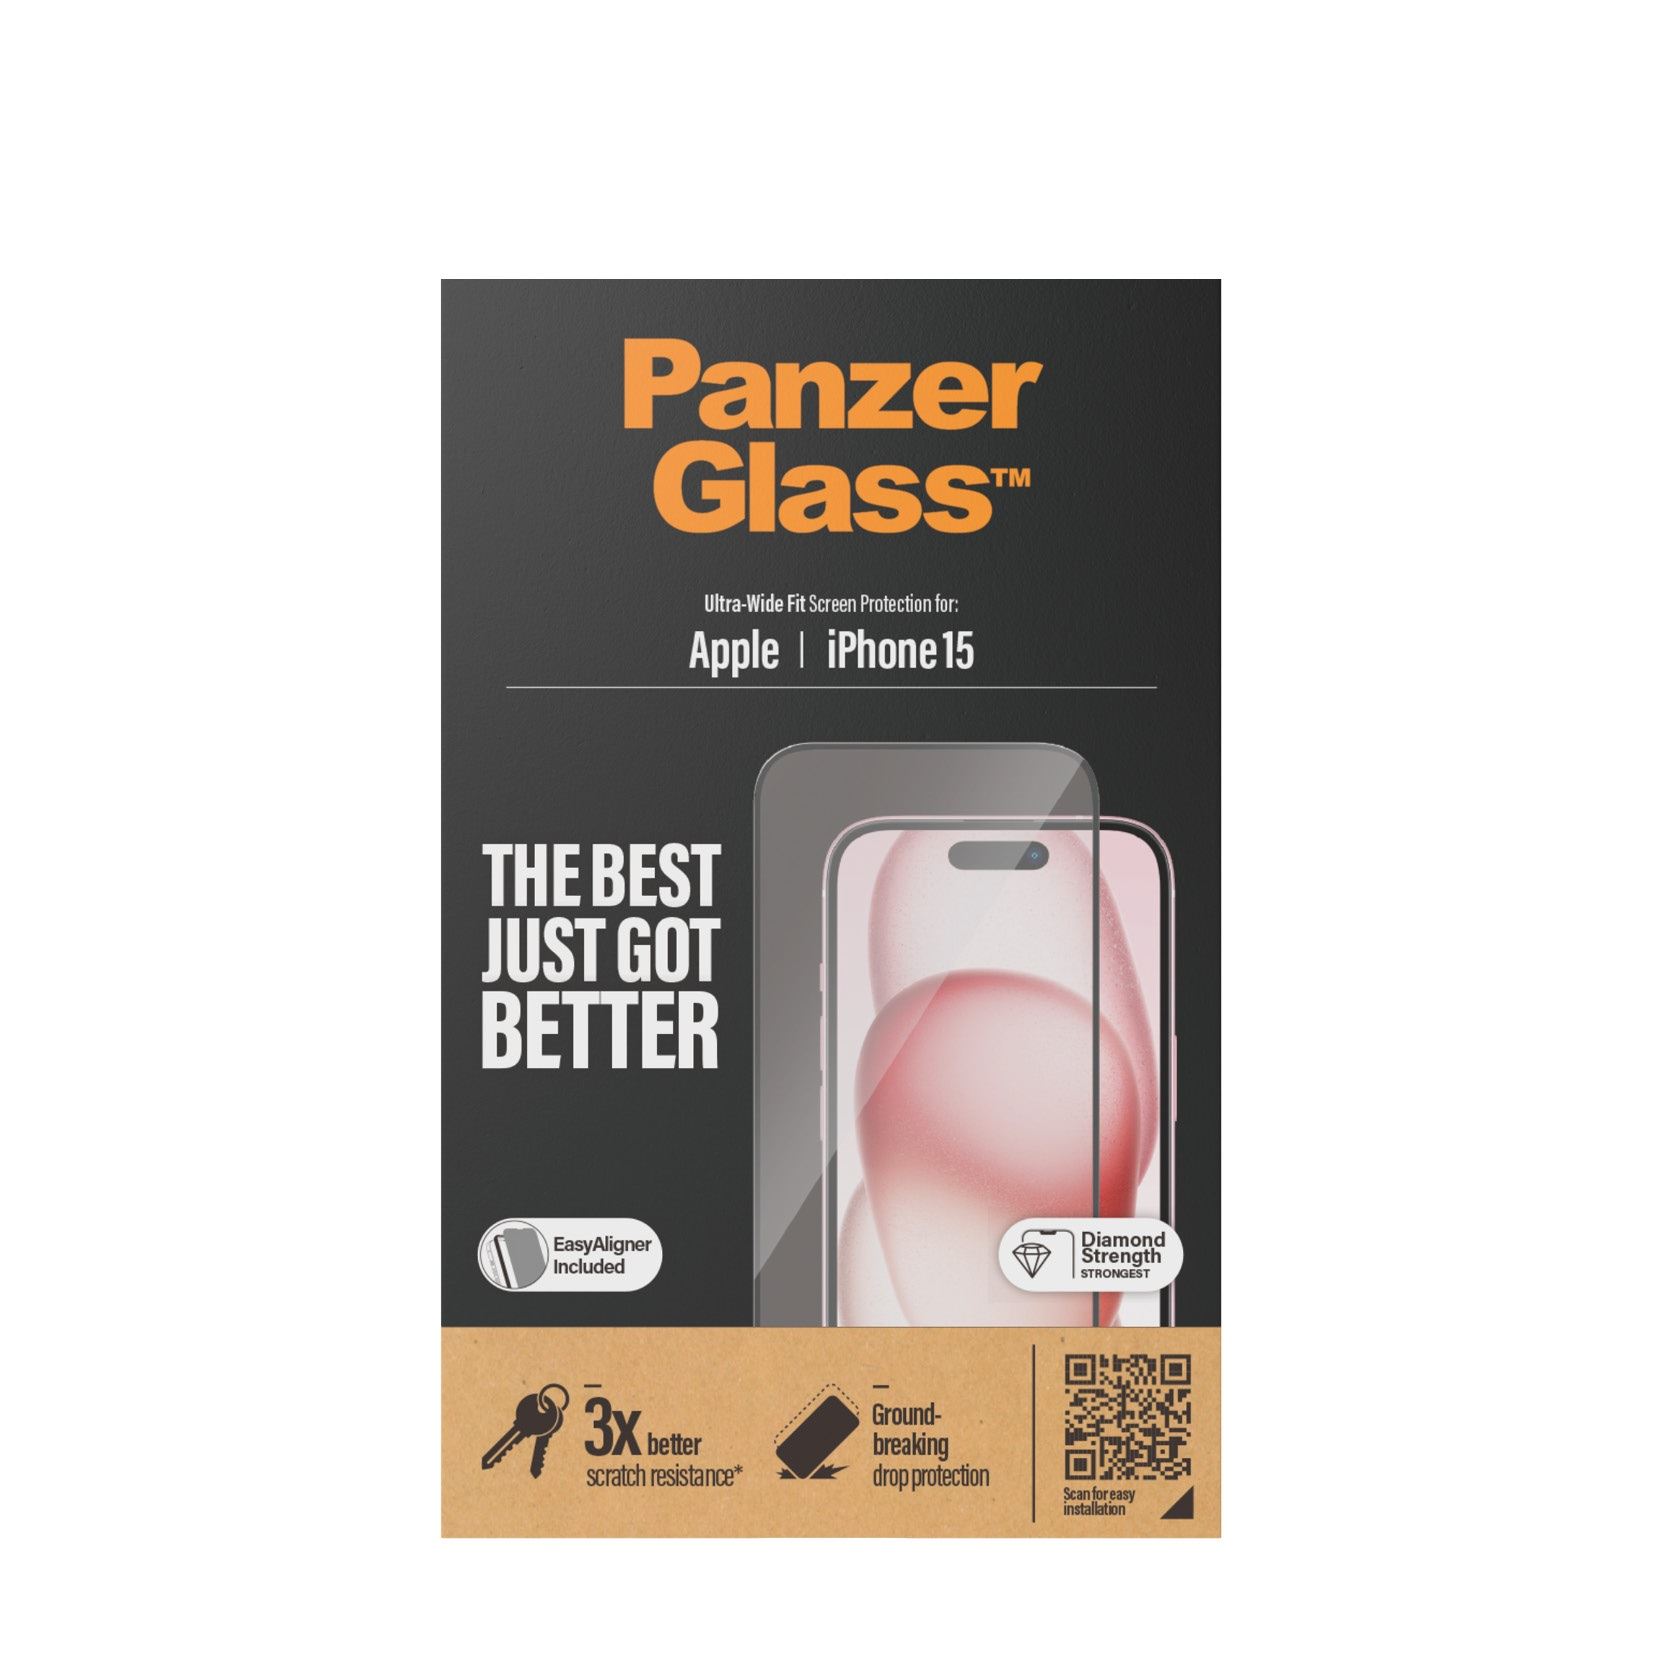 PanzerGlass Apple iPhone 15 - Ultra-Wide Fit with EasyAligner